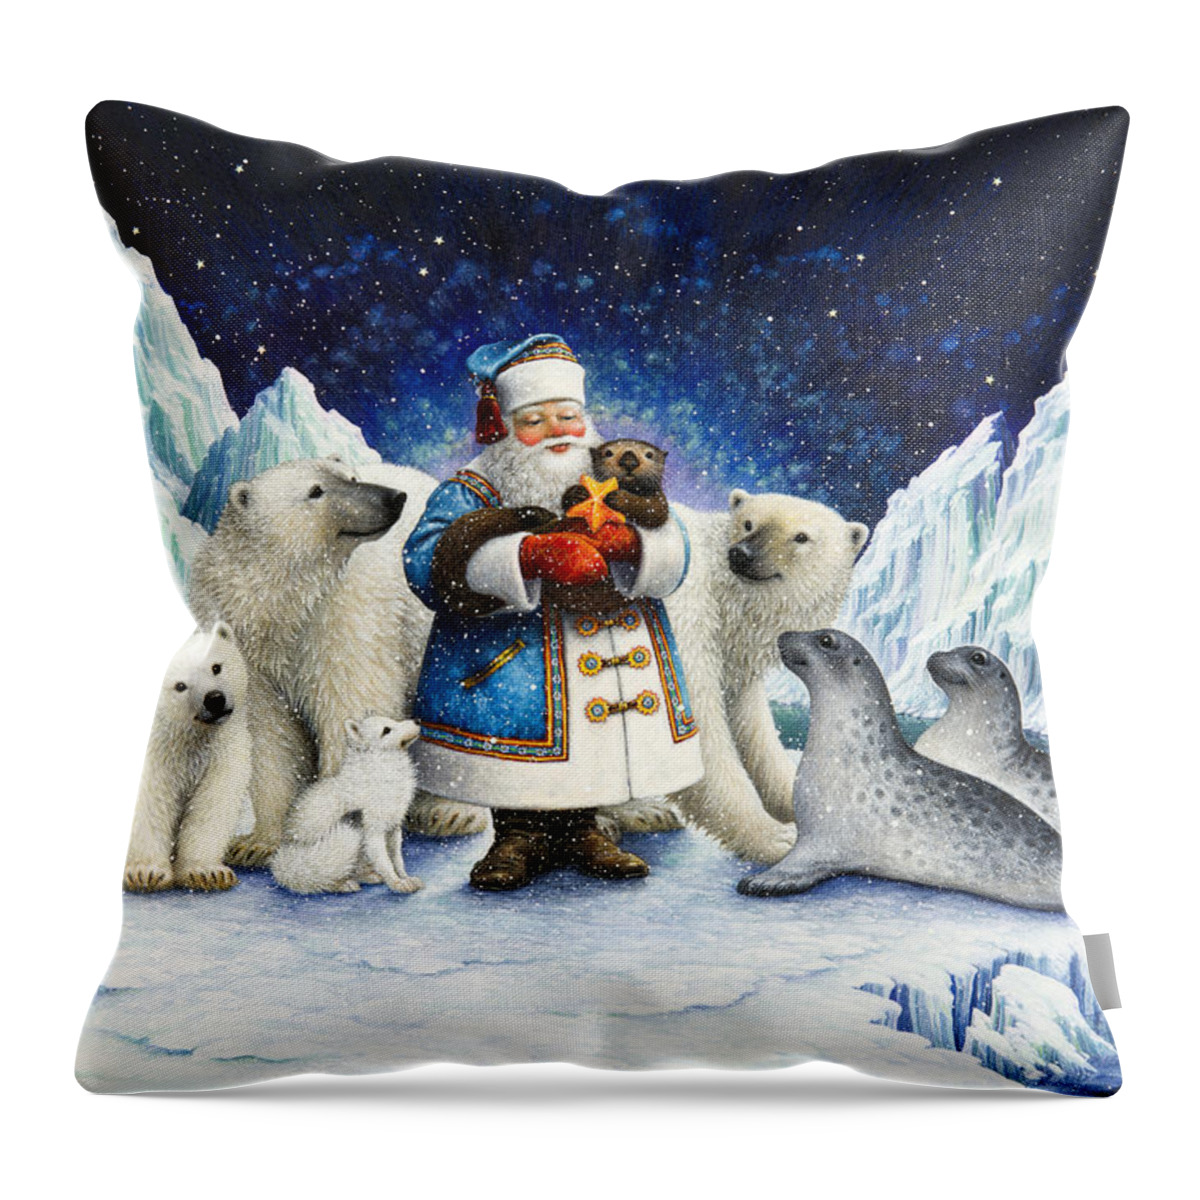 Santa Claus Throw Pillow featuring the painting Peace On Earth by Lynn Bywaters